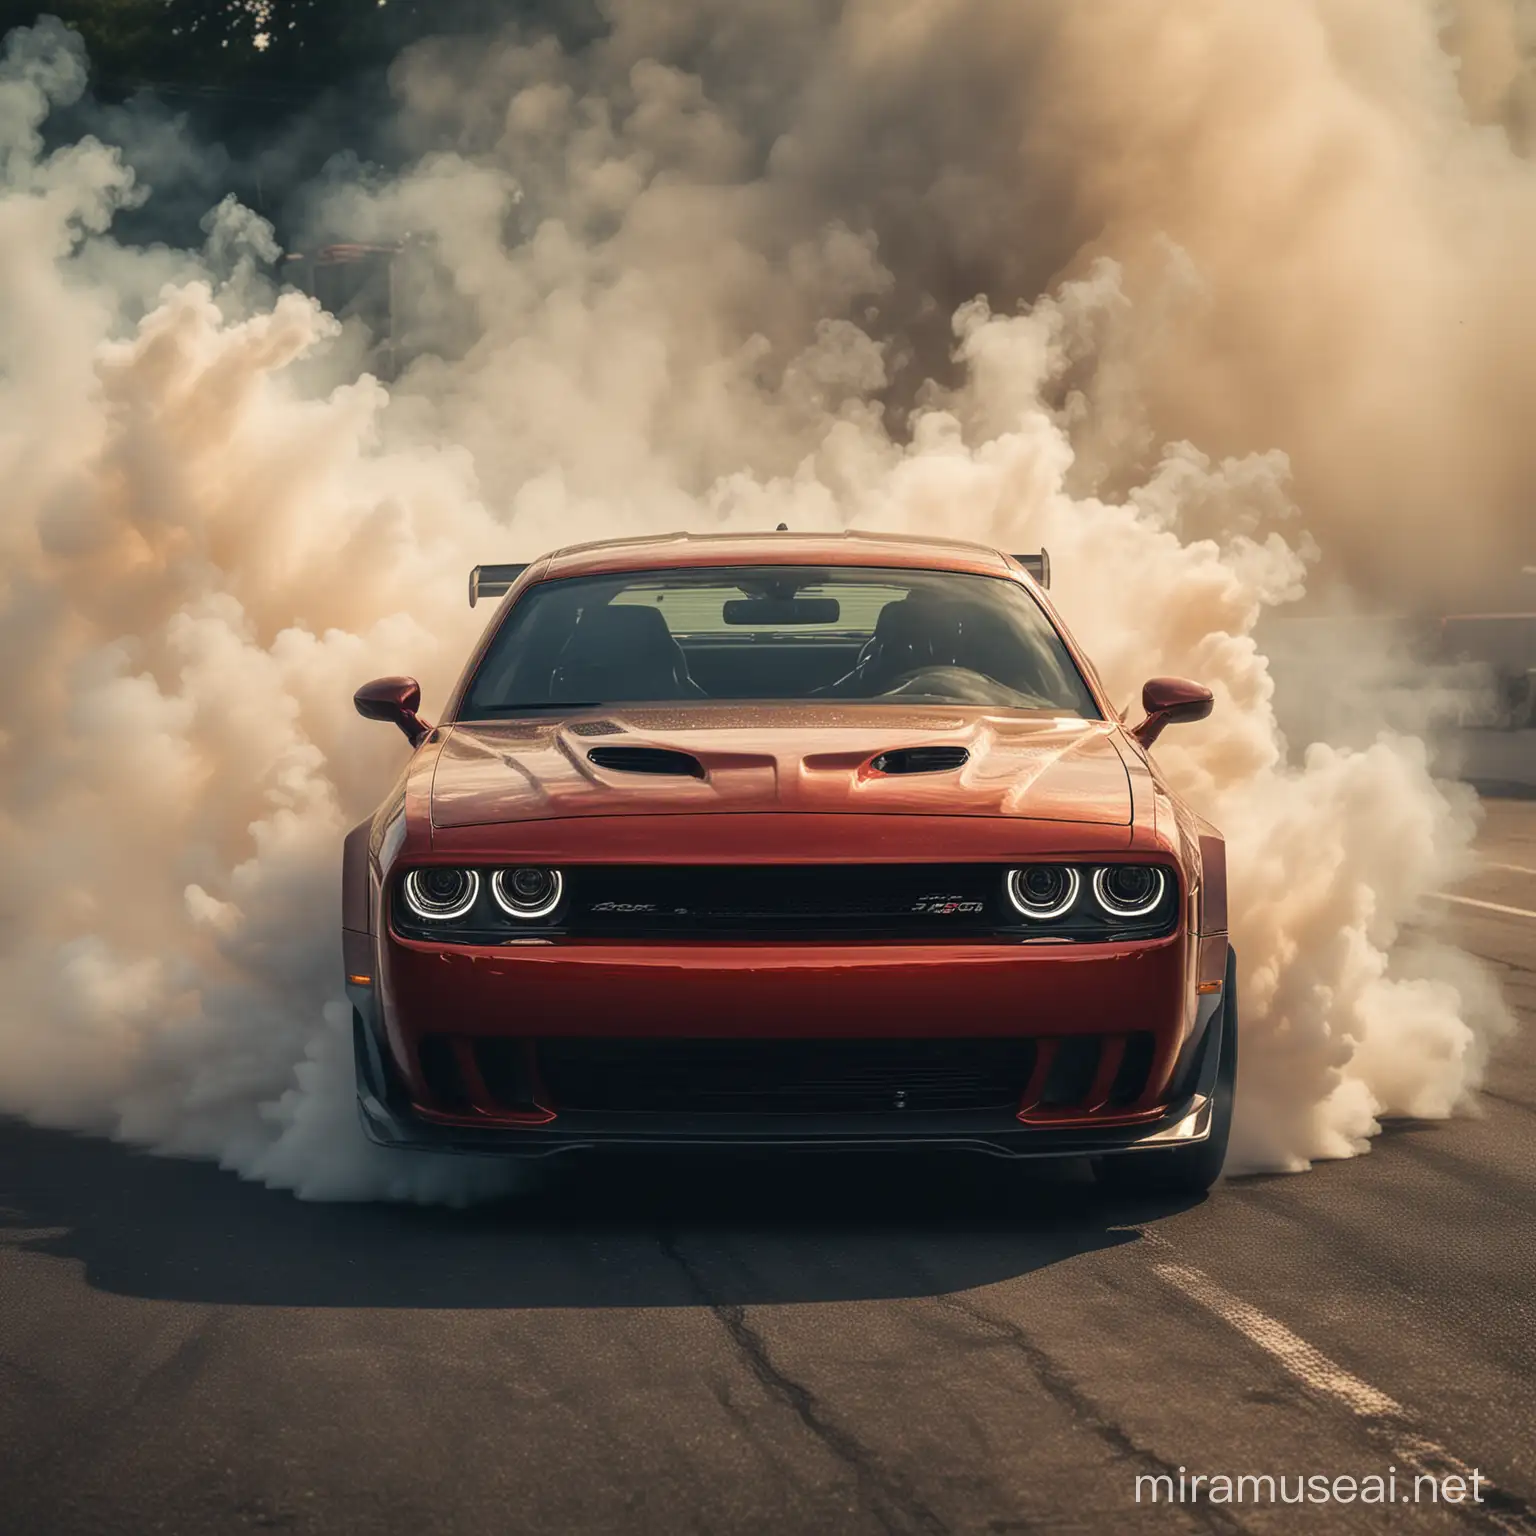 Title: "Obscured Dominance: Dodge Challenger SRT Demon in Drift Smoke"

Description: "Craft a mesmerizing depiction of a Dodge Challenger SRT Demon engulfed in billowing drift smoke, creating an atmosphere of mystery, power, and raw intensity. The focus is on capturing the car shrouded in a dense cloud of smoke, its contours and details obscured yet hinting at its formidable presence beneath. Through the veil of smoke, the headlights of the SRT Demon should pierce through, casting an eerie glow and adding a hauntingly beautiful element to the composition. The scene should exude a sense of anticipation and intrigue, as if the beast within is poised to unleash its fury upon the asphalt. Let the artwork evoke a visceral reaction, igniting the imagination and leaving an indelible impression of the Challenger's unrivaled dominance."